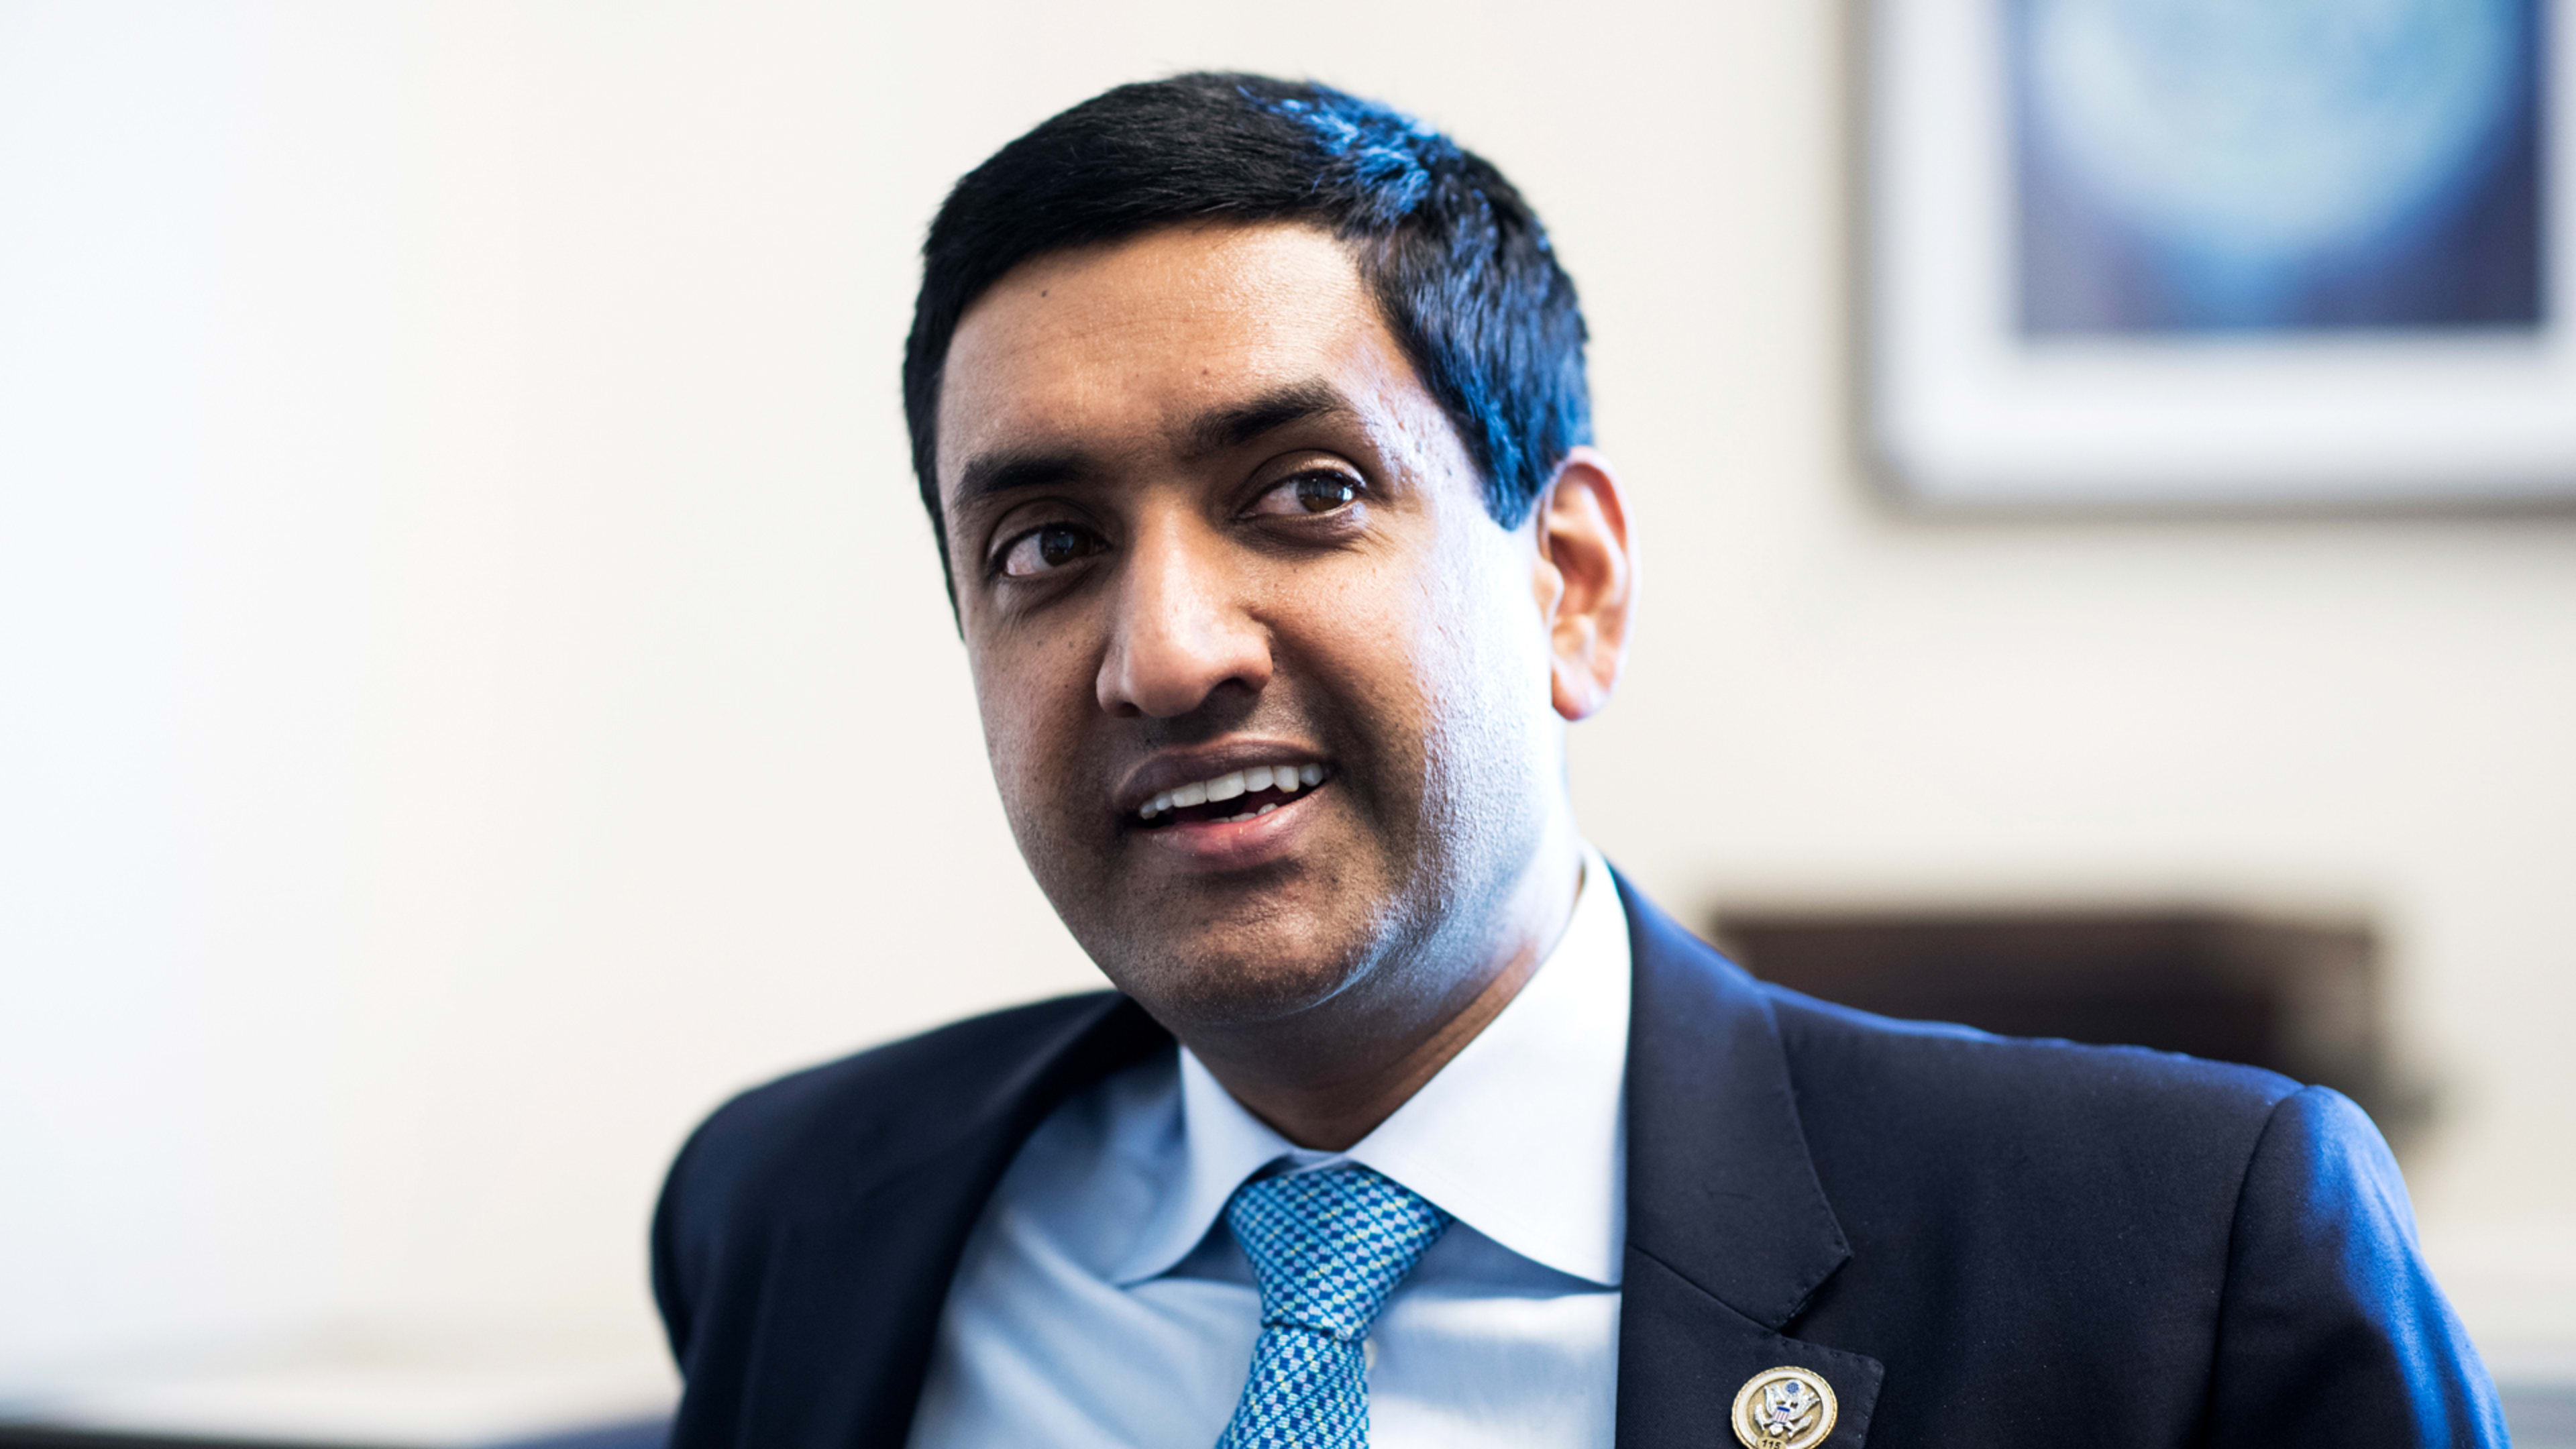 12 Interesting Things Silicon Valley’s Congressman, Ro Khanna, Told Me Over Coffee